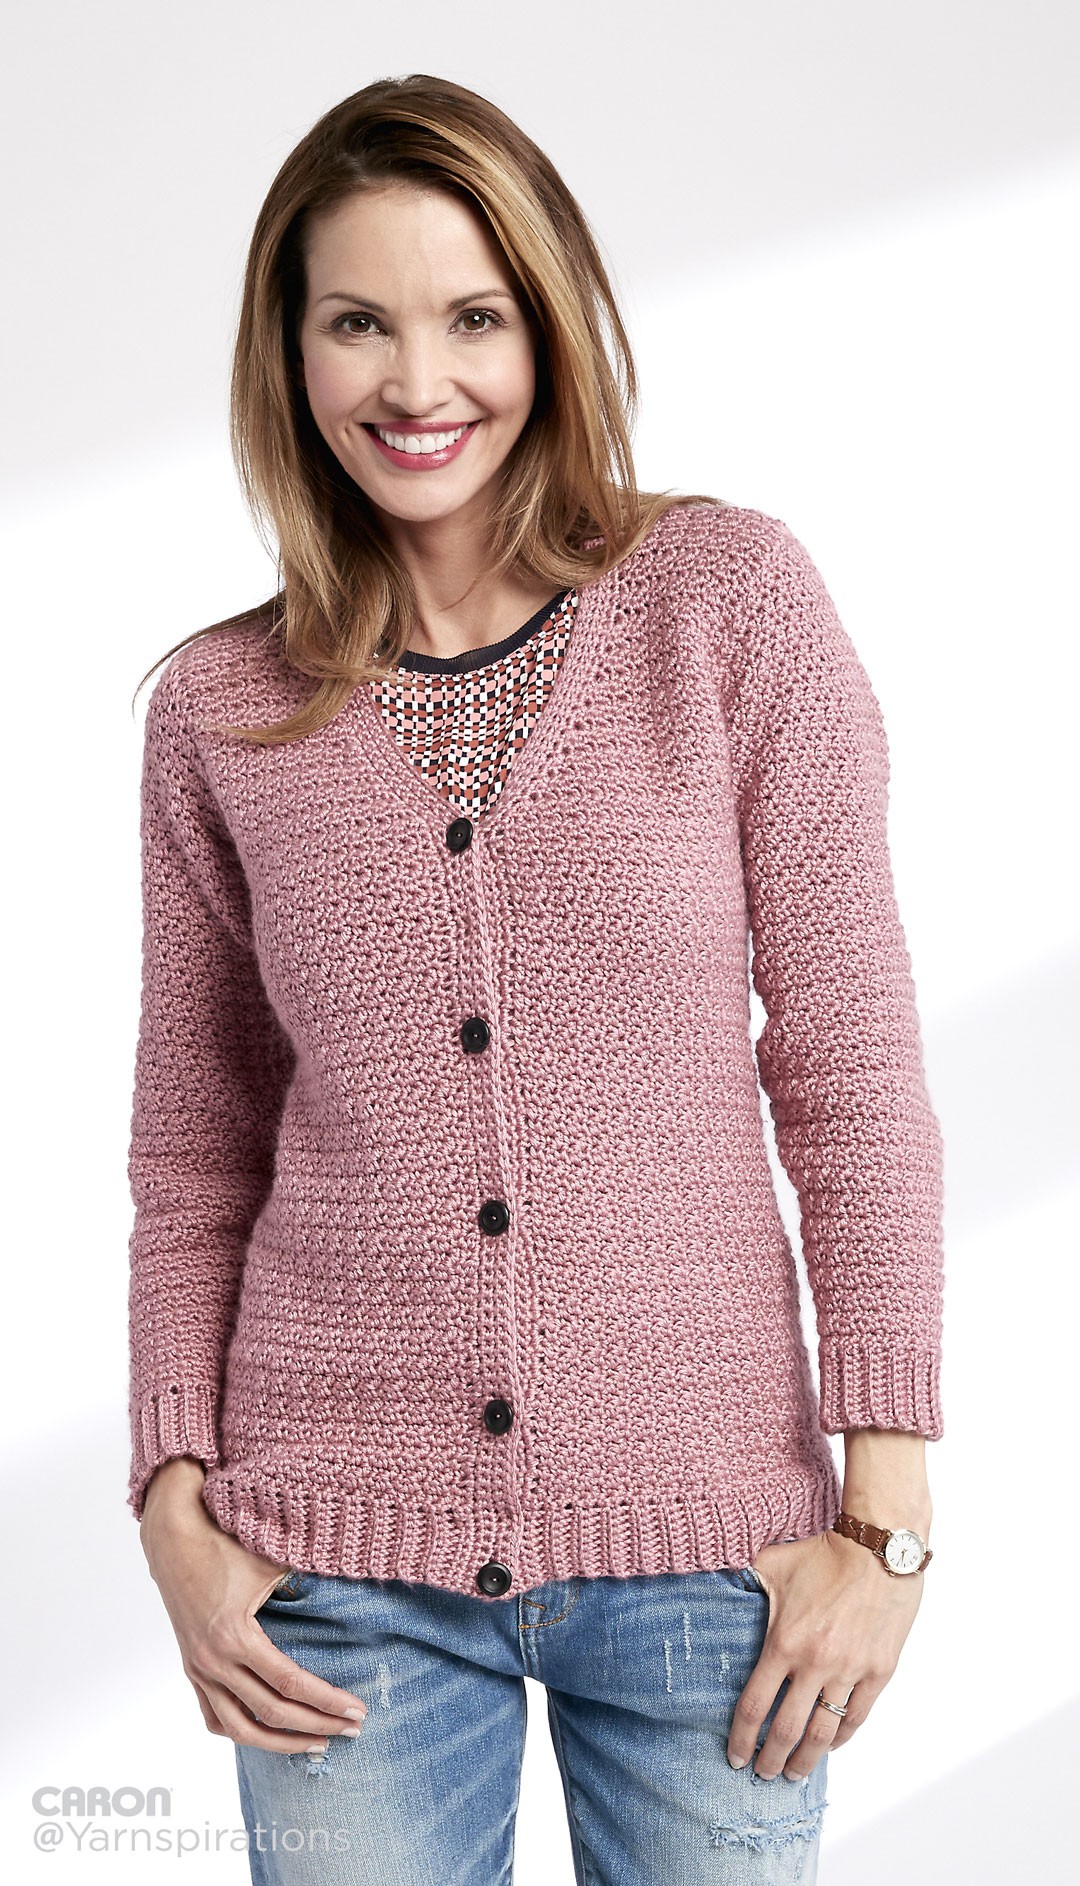 Ladies Crochet Cardigan Pattern Outfits